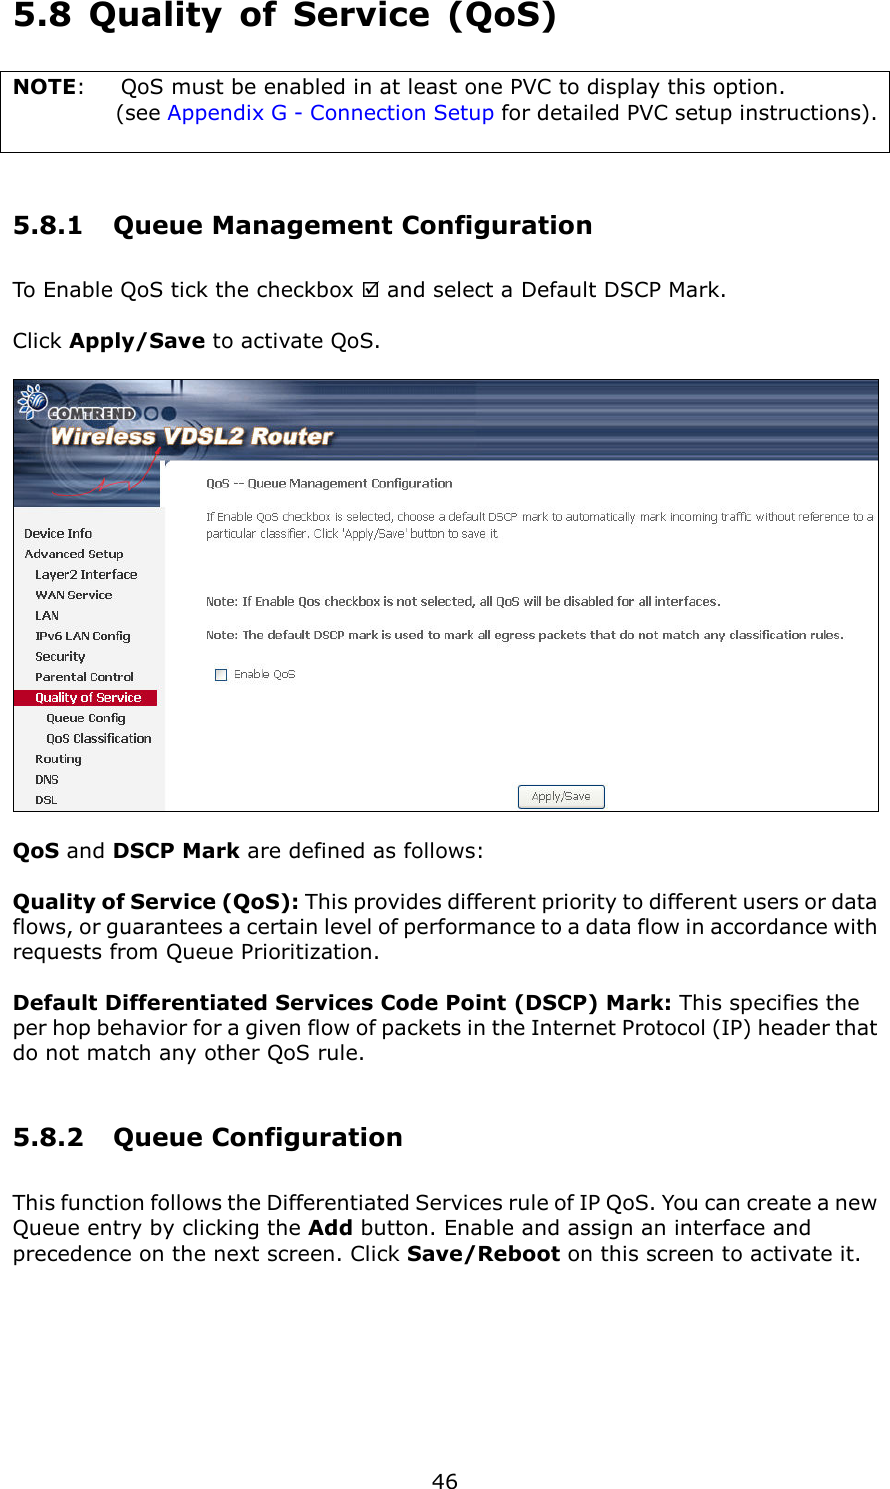   46 5.8  Quality  of  Service  (QoS) NOTE:  QoS must be enabled in at least one PVC to display this option.   (see Appendix G - Connection Setup for detailed PVC setup instructions).   5.8.1  Queue Management Configuration To Enable QoS tick the checkbox  and select a Default DSCP Mark.    Click Apply/Save to activate QoS.    QoS and DSCP Mark are defined as follows:  Quality of Service (QoS): This provides different priority to different users or data flows, or guarantees a certain level of performance to a data flow in accordance with requests from Queue Prioritization.  Default Differentiated Services Code Point (DSCP) Mark: This specifies the per hop behavior for a given flow of packets in the Internet Protocol (IP) header that do not match any other QoS rule. 5.8.2  Queue Configuration This function follows the Differentiated Services rule of IP QoS. You can create a new Queue entry by clicking the Add button. Enable and assign an interface and precedence on the next screen. Click Save/Reboot on this screen to activate it.  